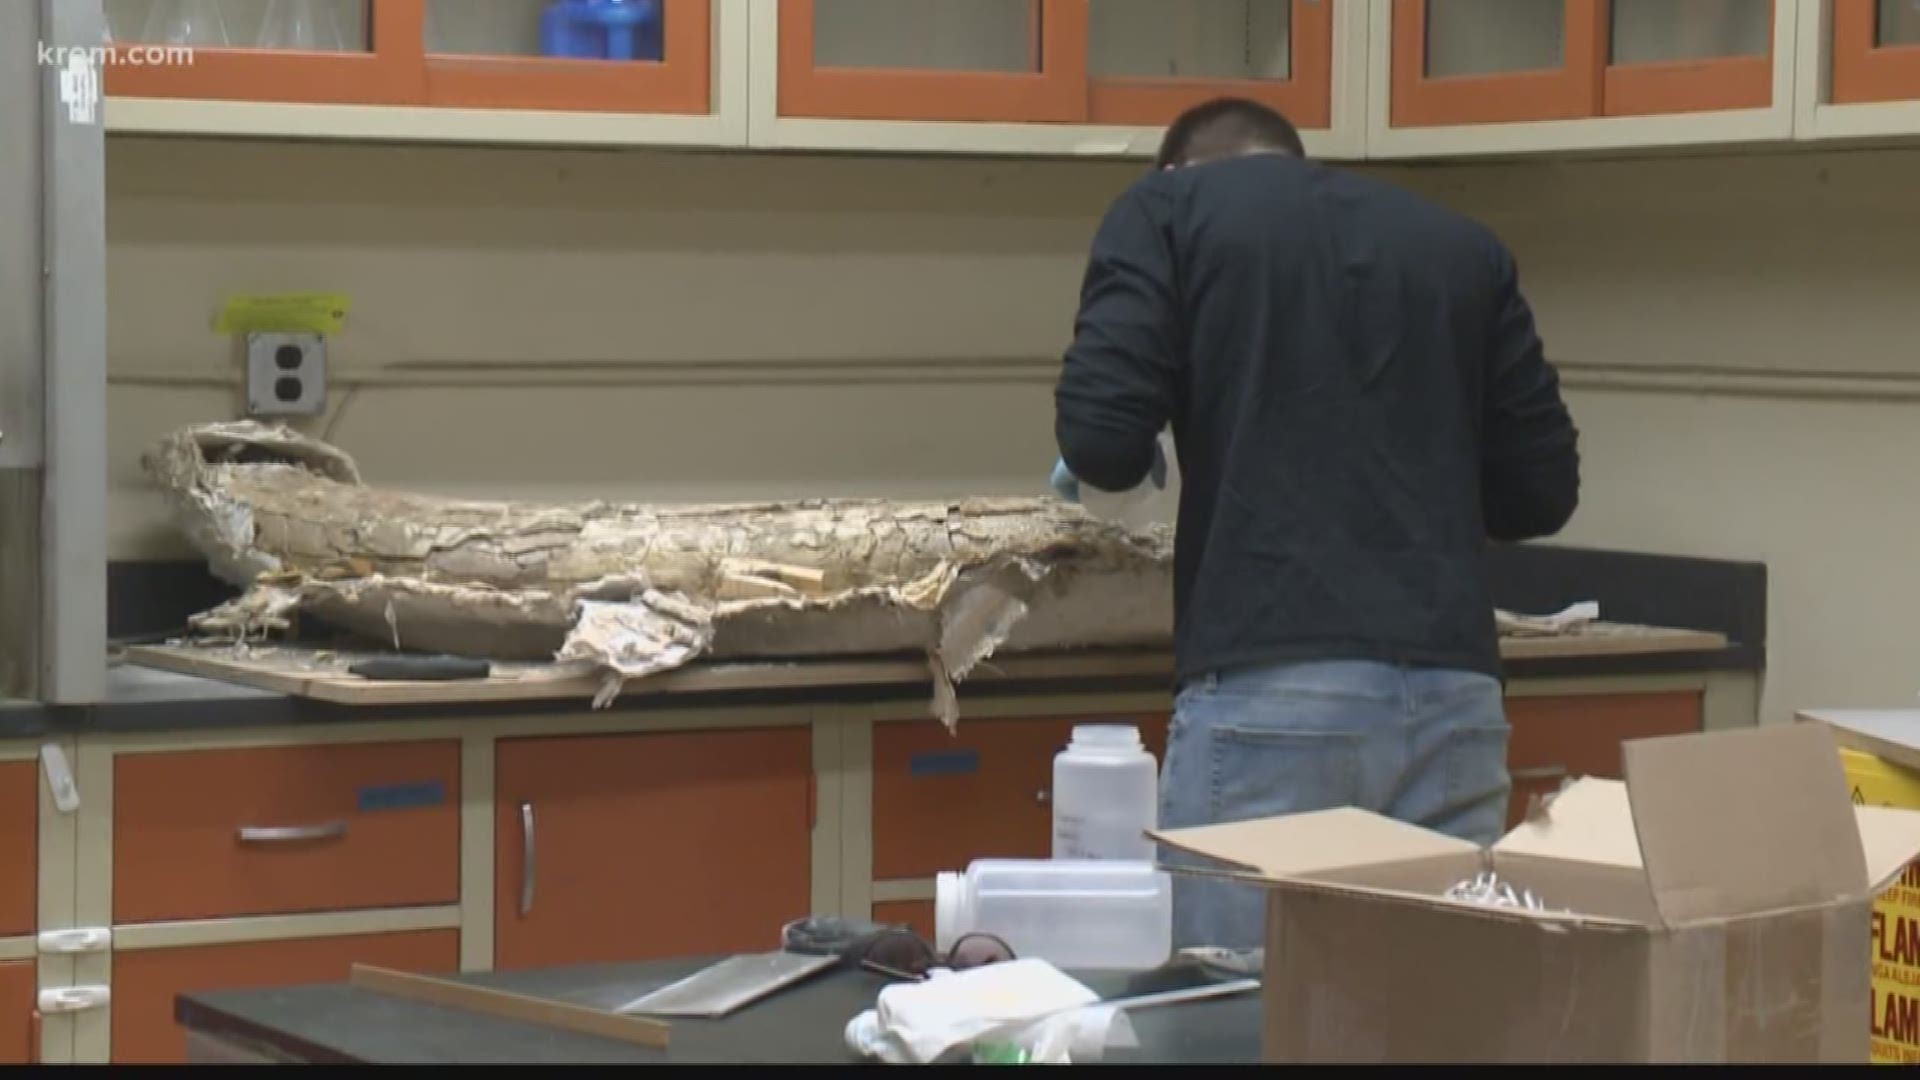 KREM Reporter Taylor Viydo spoke with researchers at the University of Idaho about how they are using CT scans to research mammoth bones.